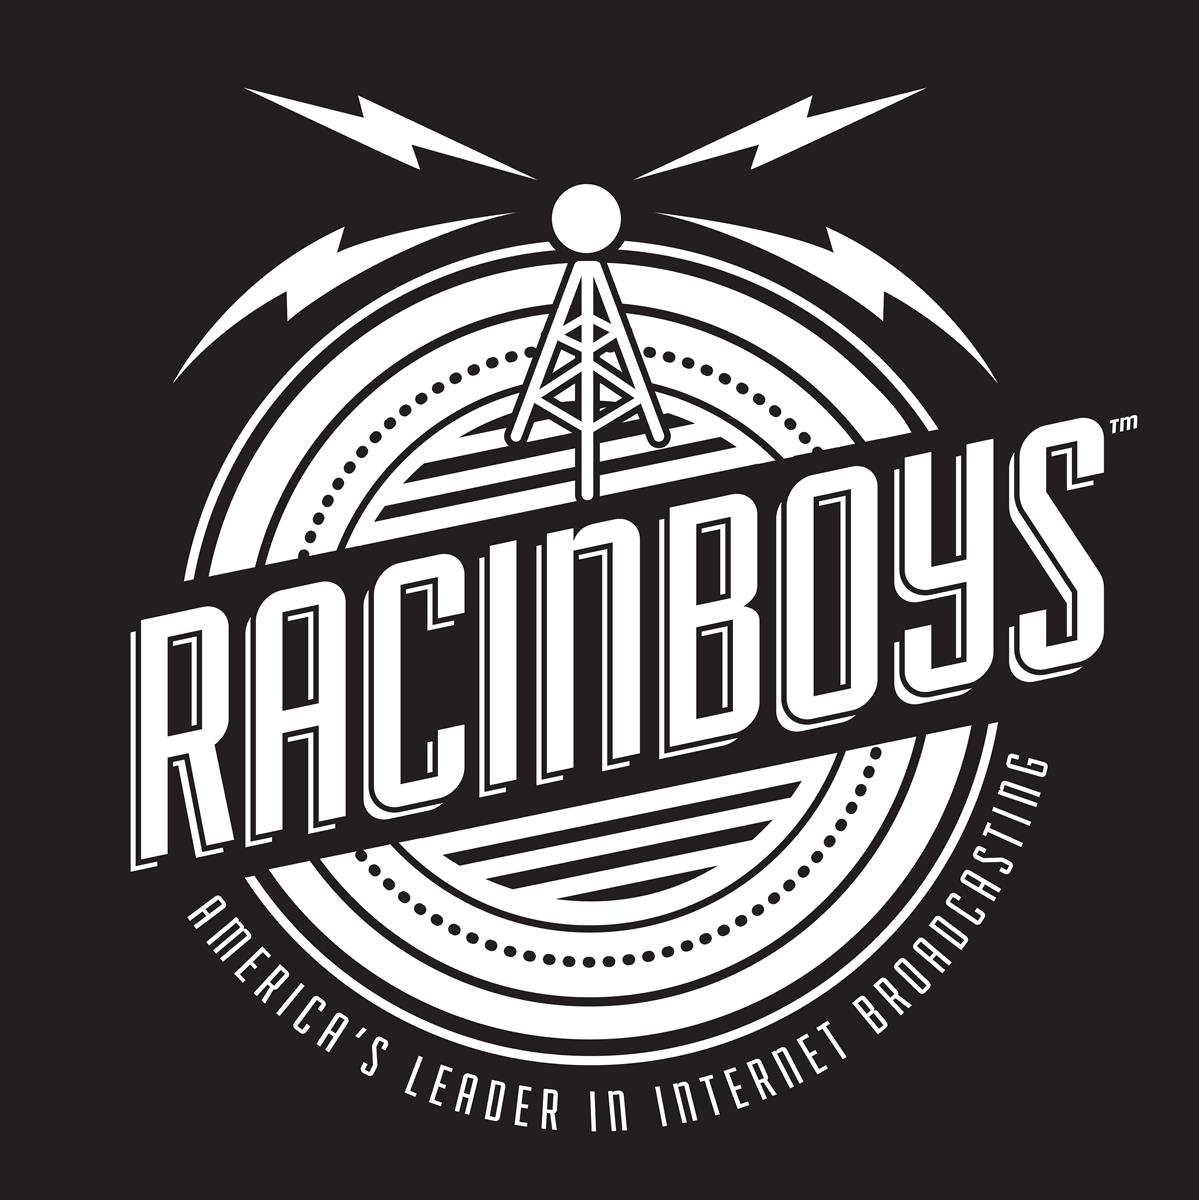 RacinBoys Broadcasting Network Opening 2020 With Live Pay-Per-View Stream of Lucas Oil Tulsa Shootout